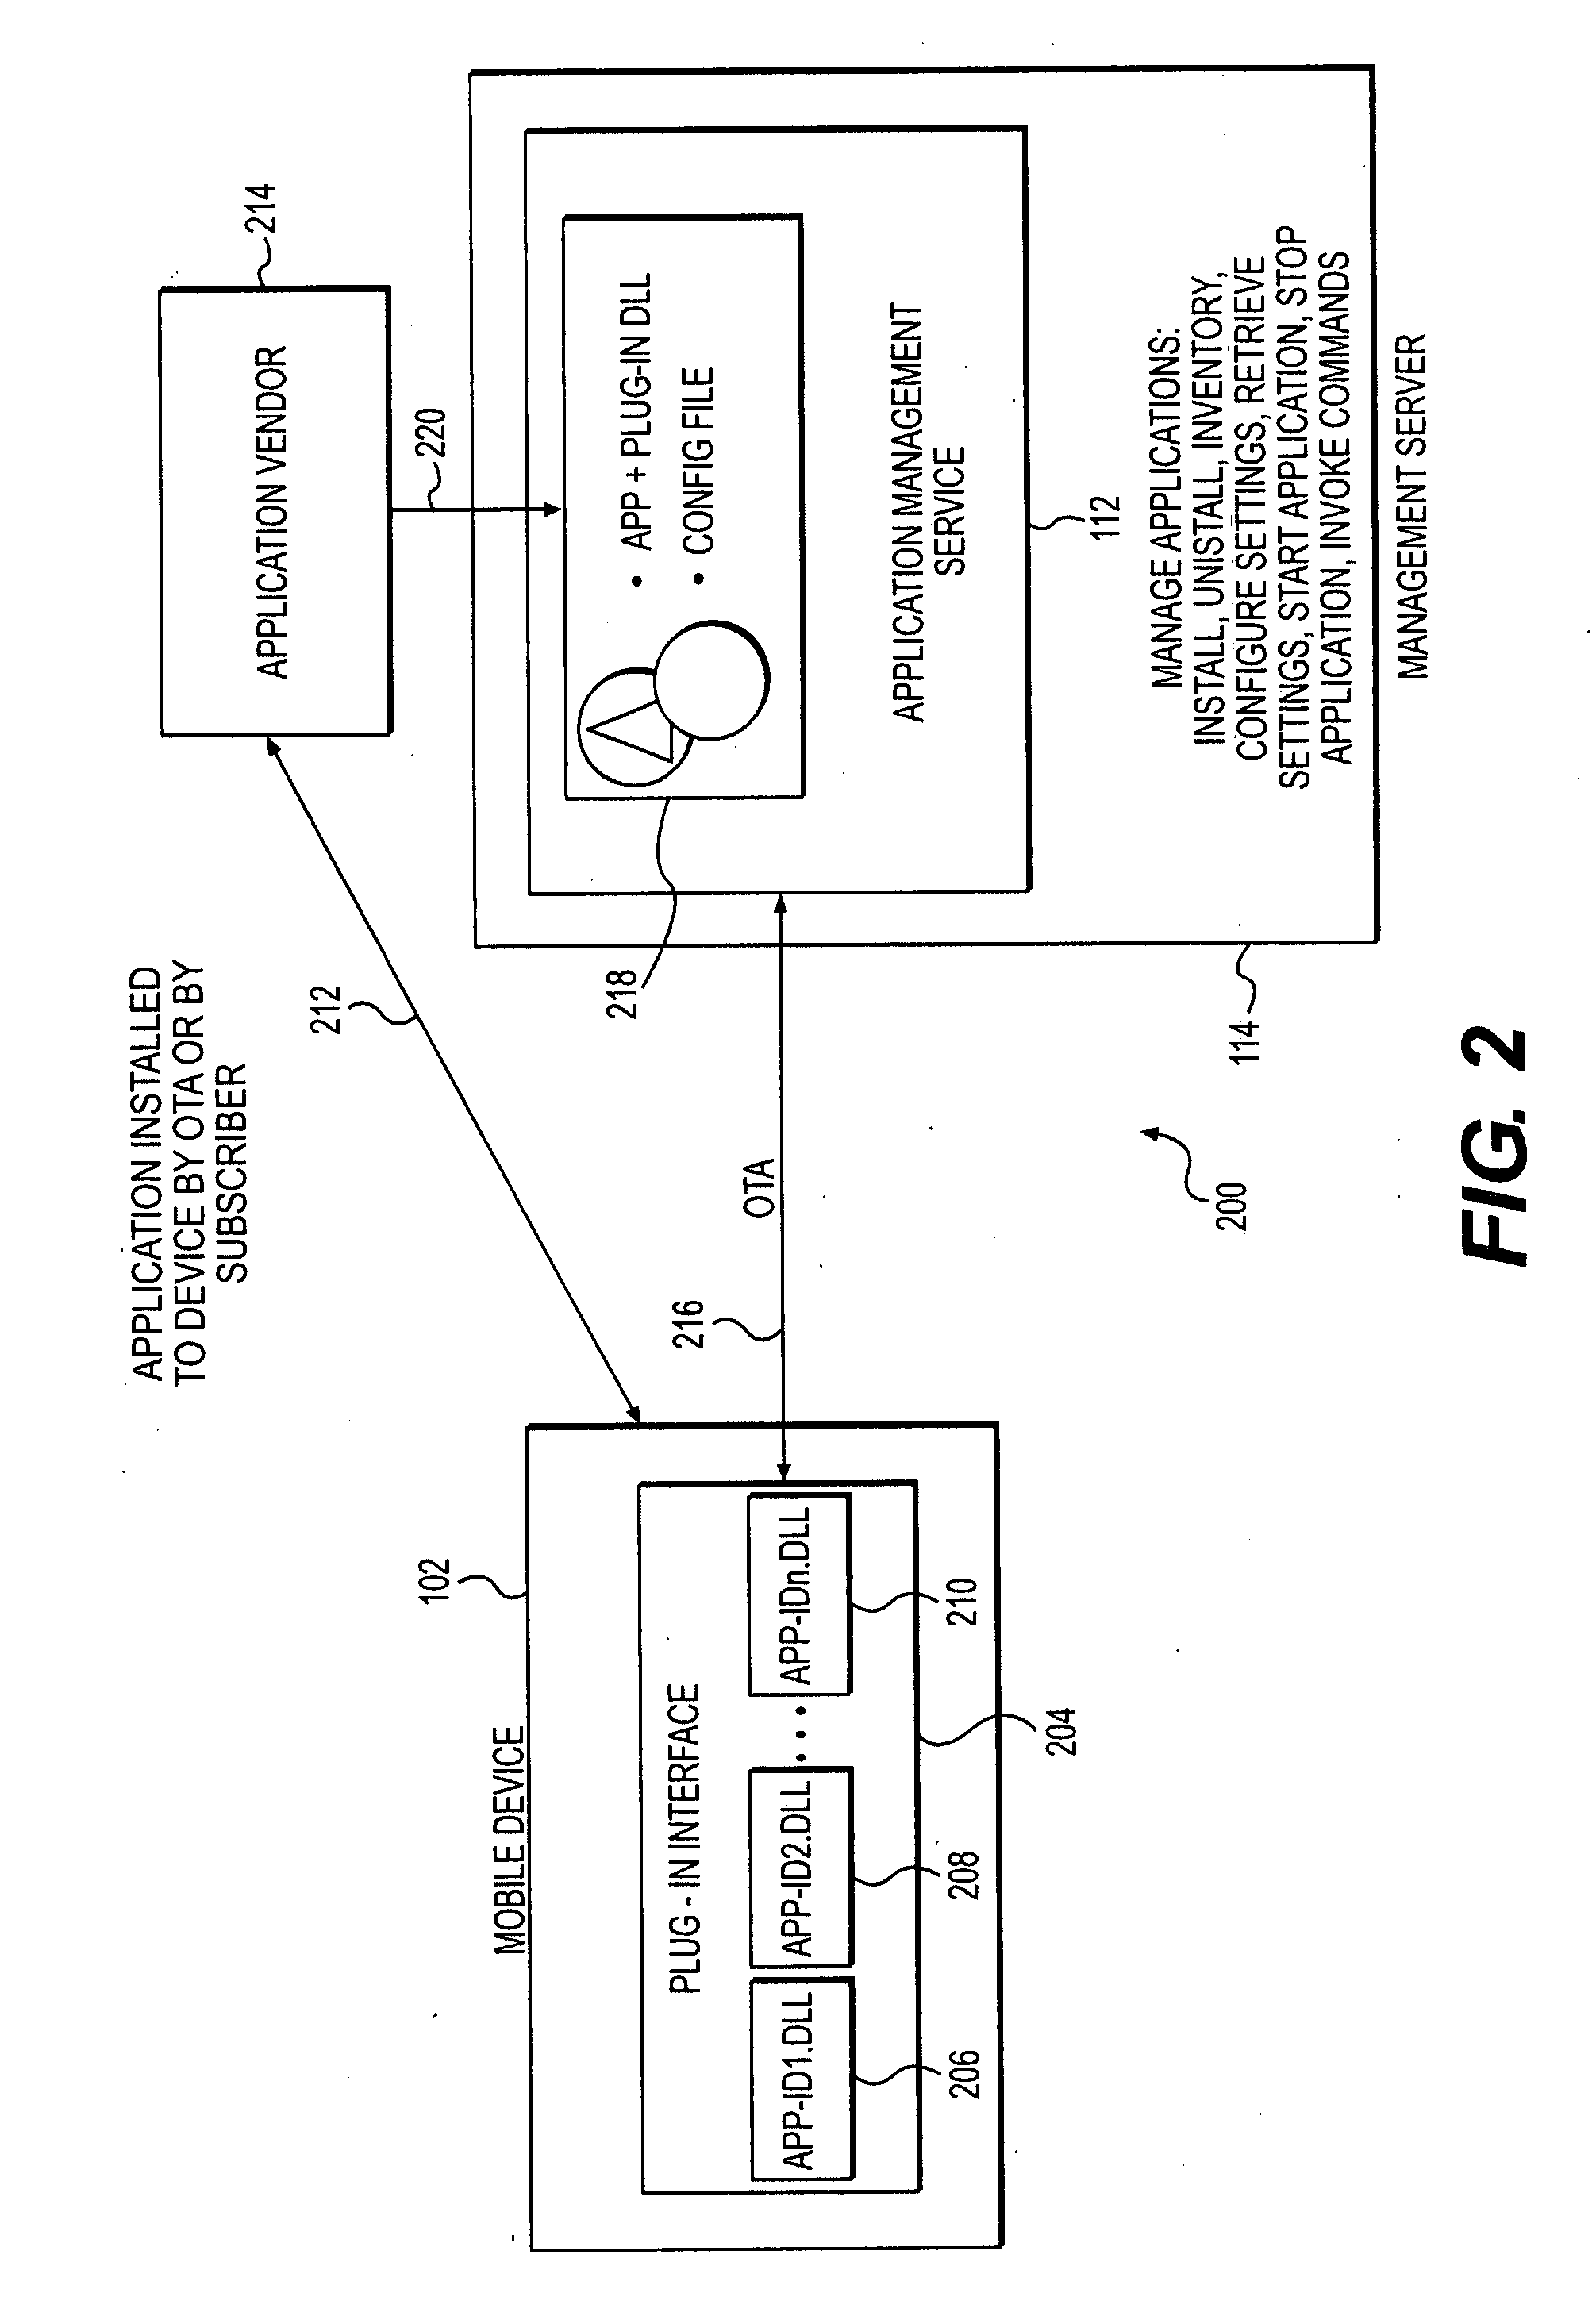 System and method to provide application management on wireless data terminals by means of device management agent and dynamic link libraries